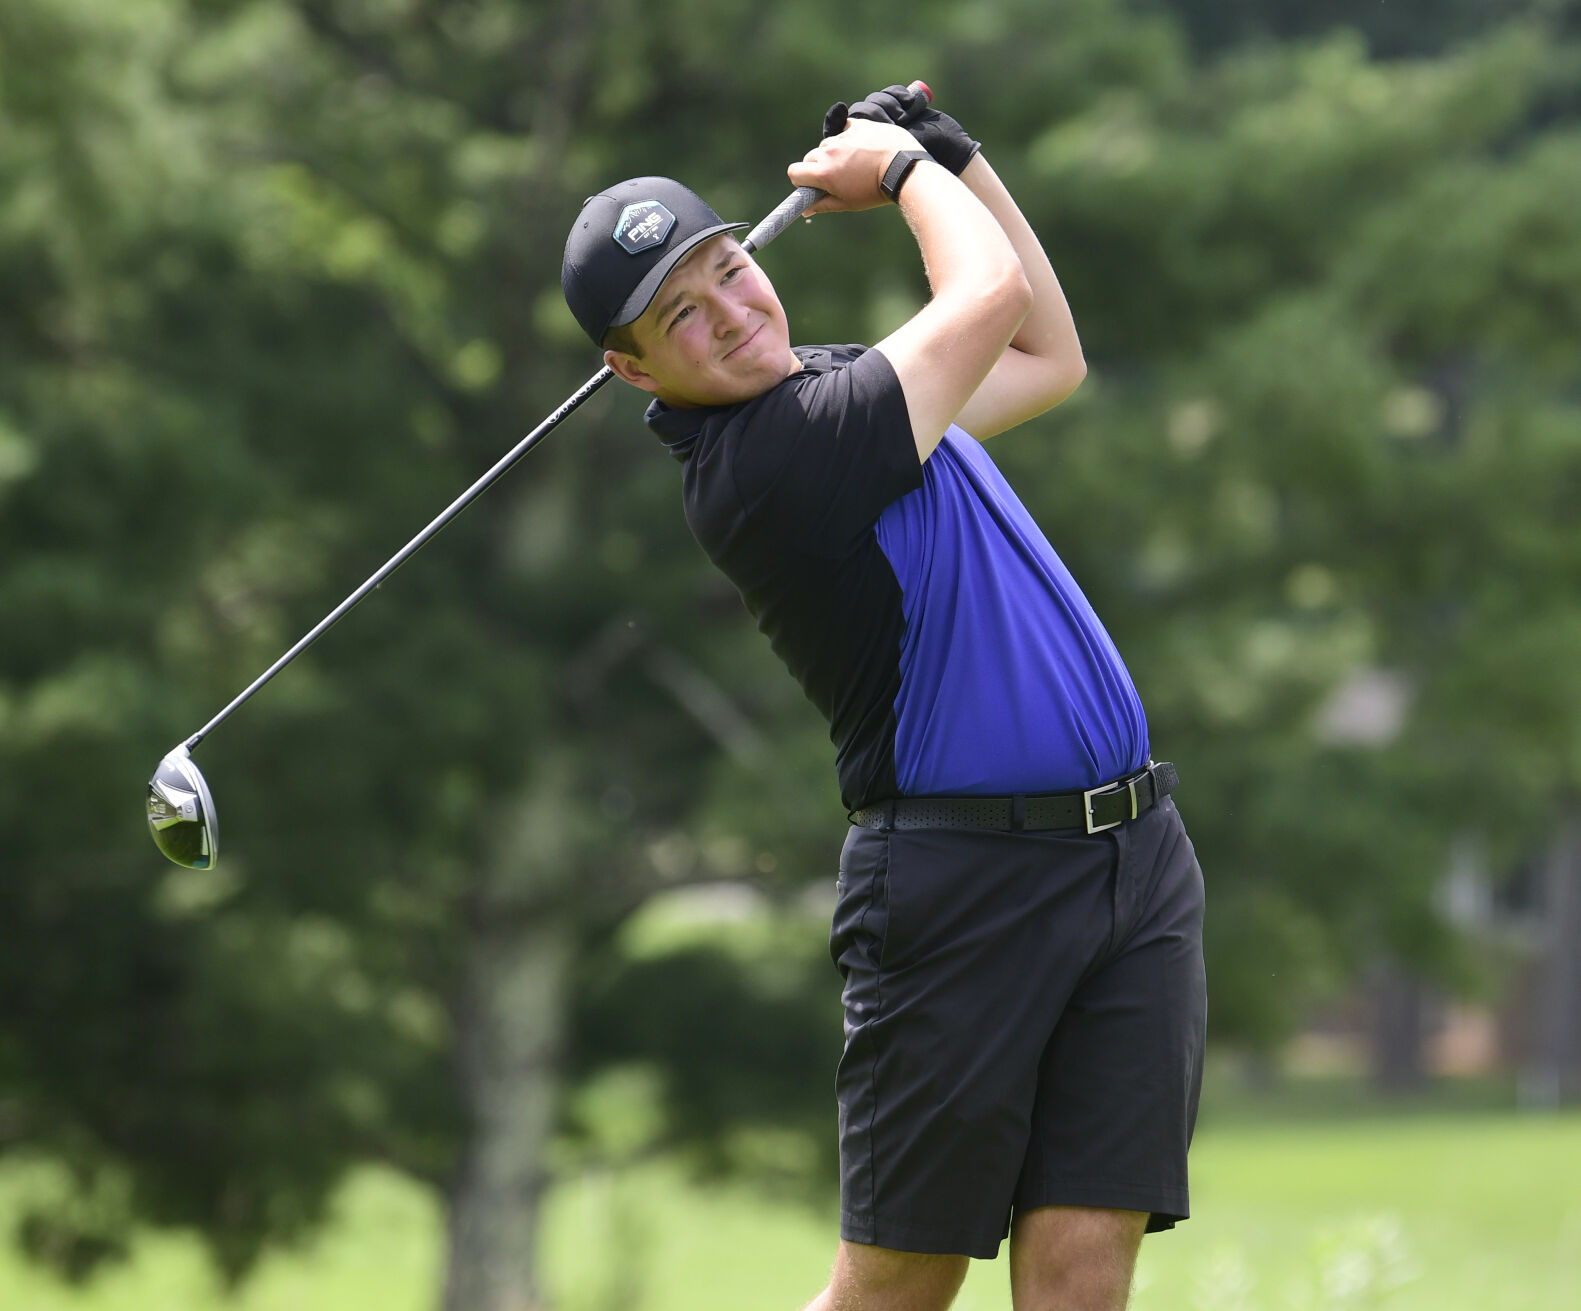 Appalachian Amateur was ray of hope for COVID-blighted sports scene Sports bdtonline image